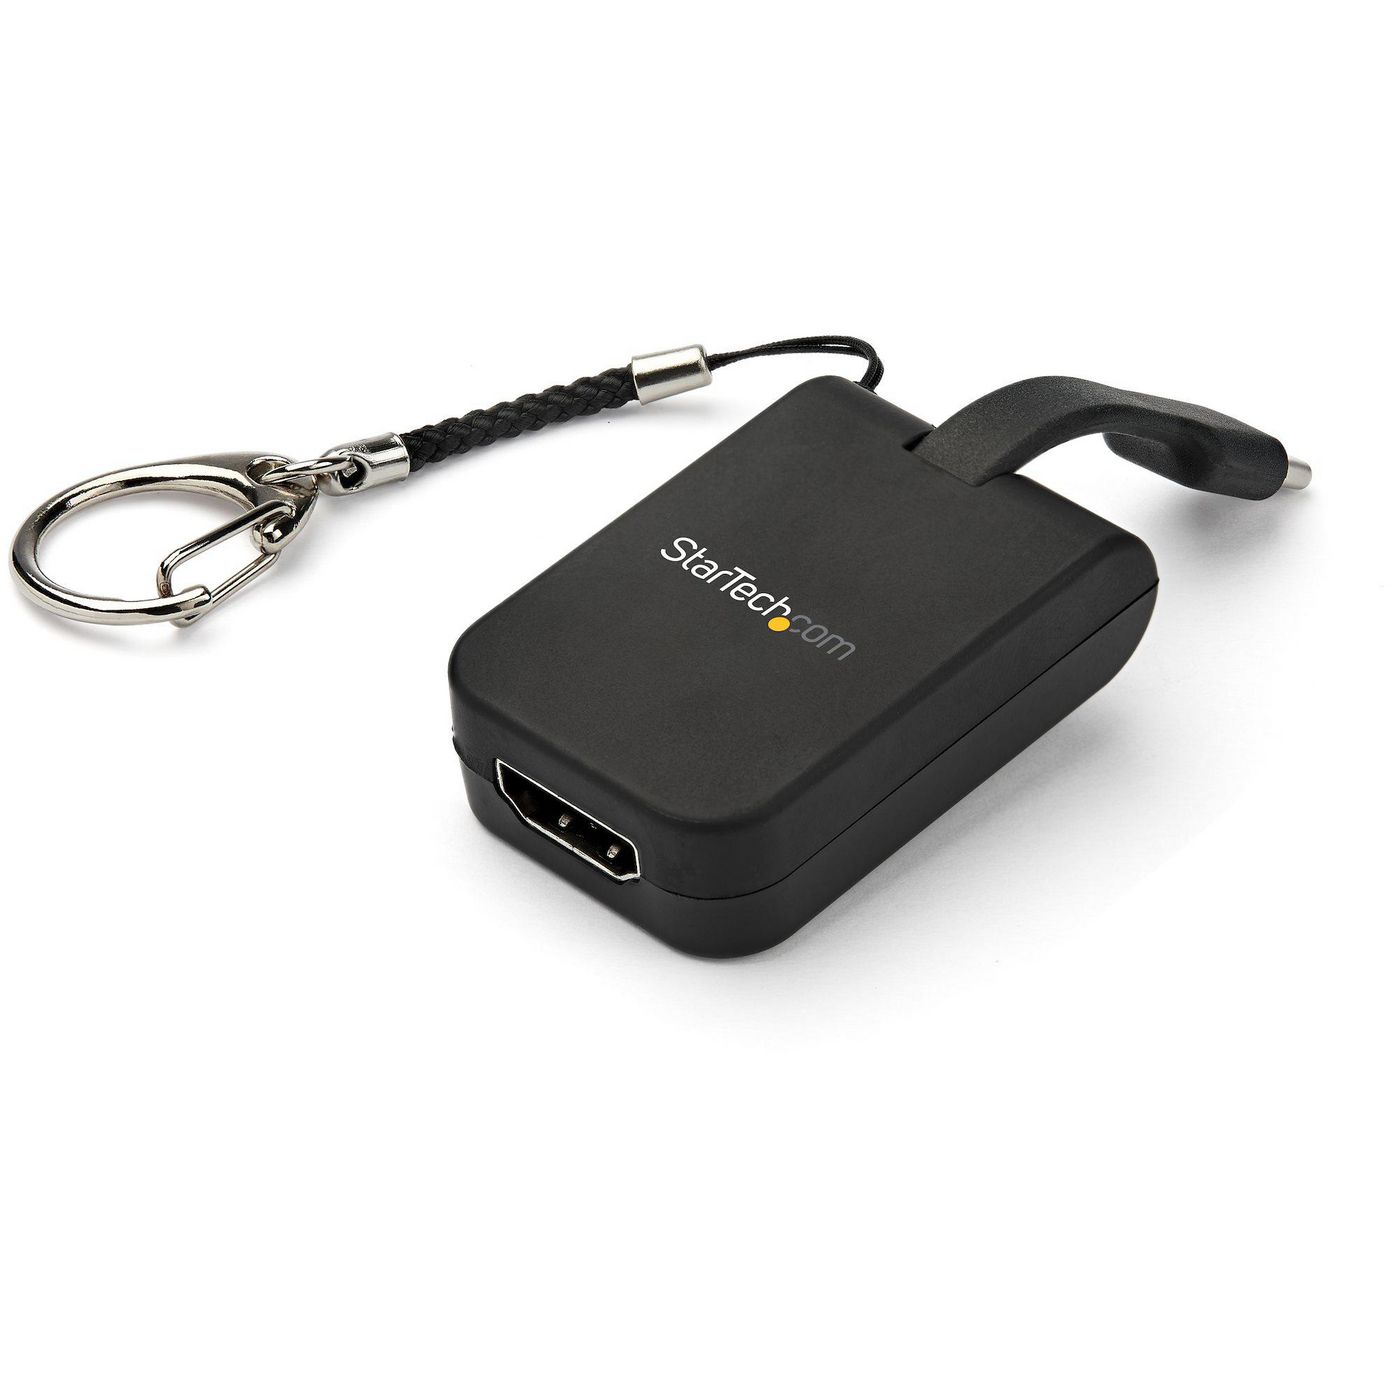 STARTECH.COM Portable USB C to HDMI Adapter - Quick-Connect Keychain - 4K 30Hz USB Type C Video Conv